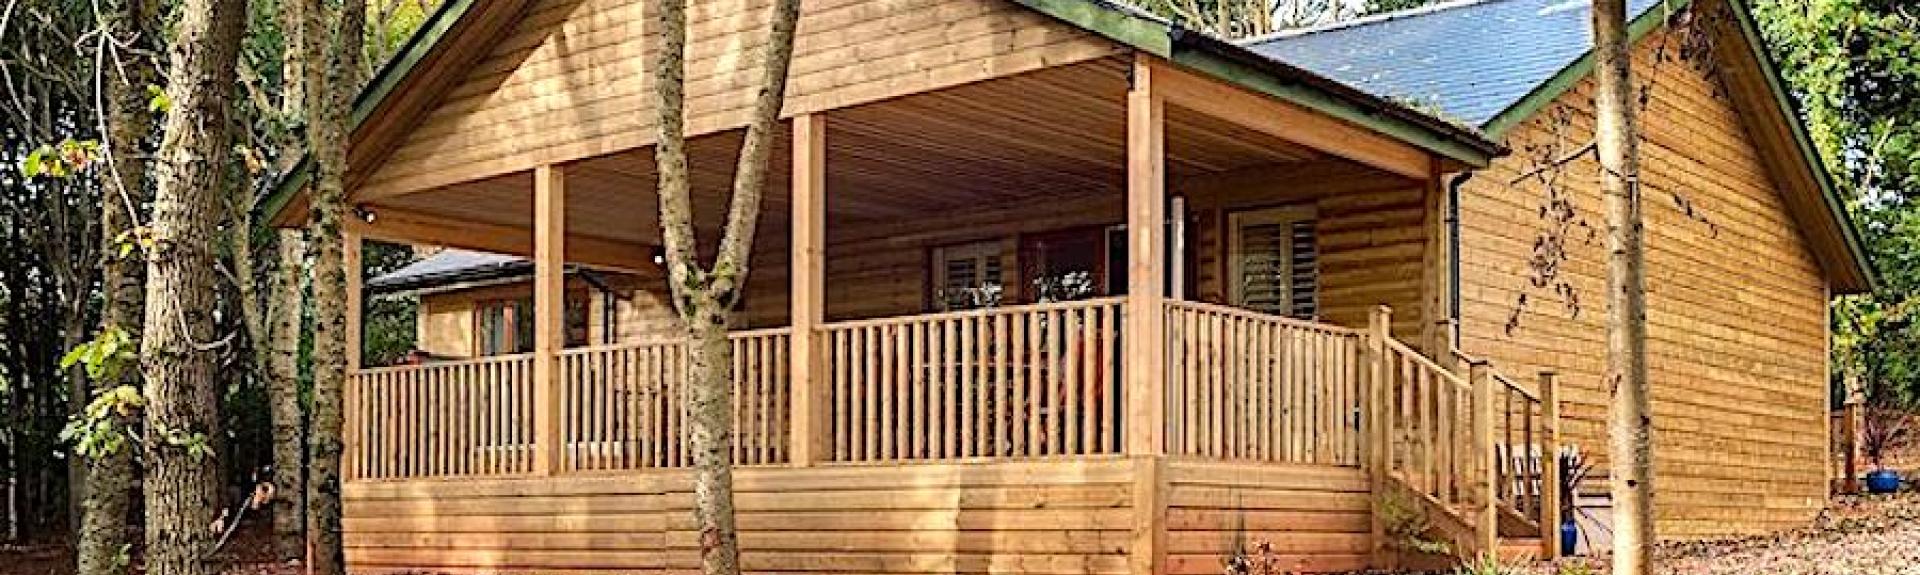 Exterrior of an eco lodge with a  covered deck and hot-tub.